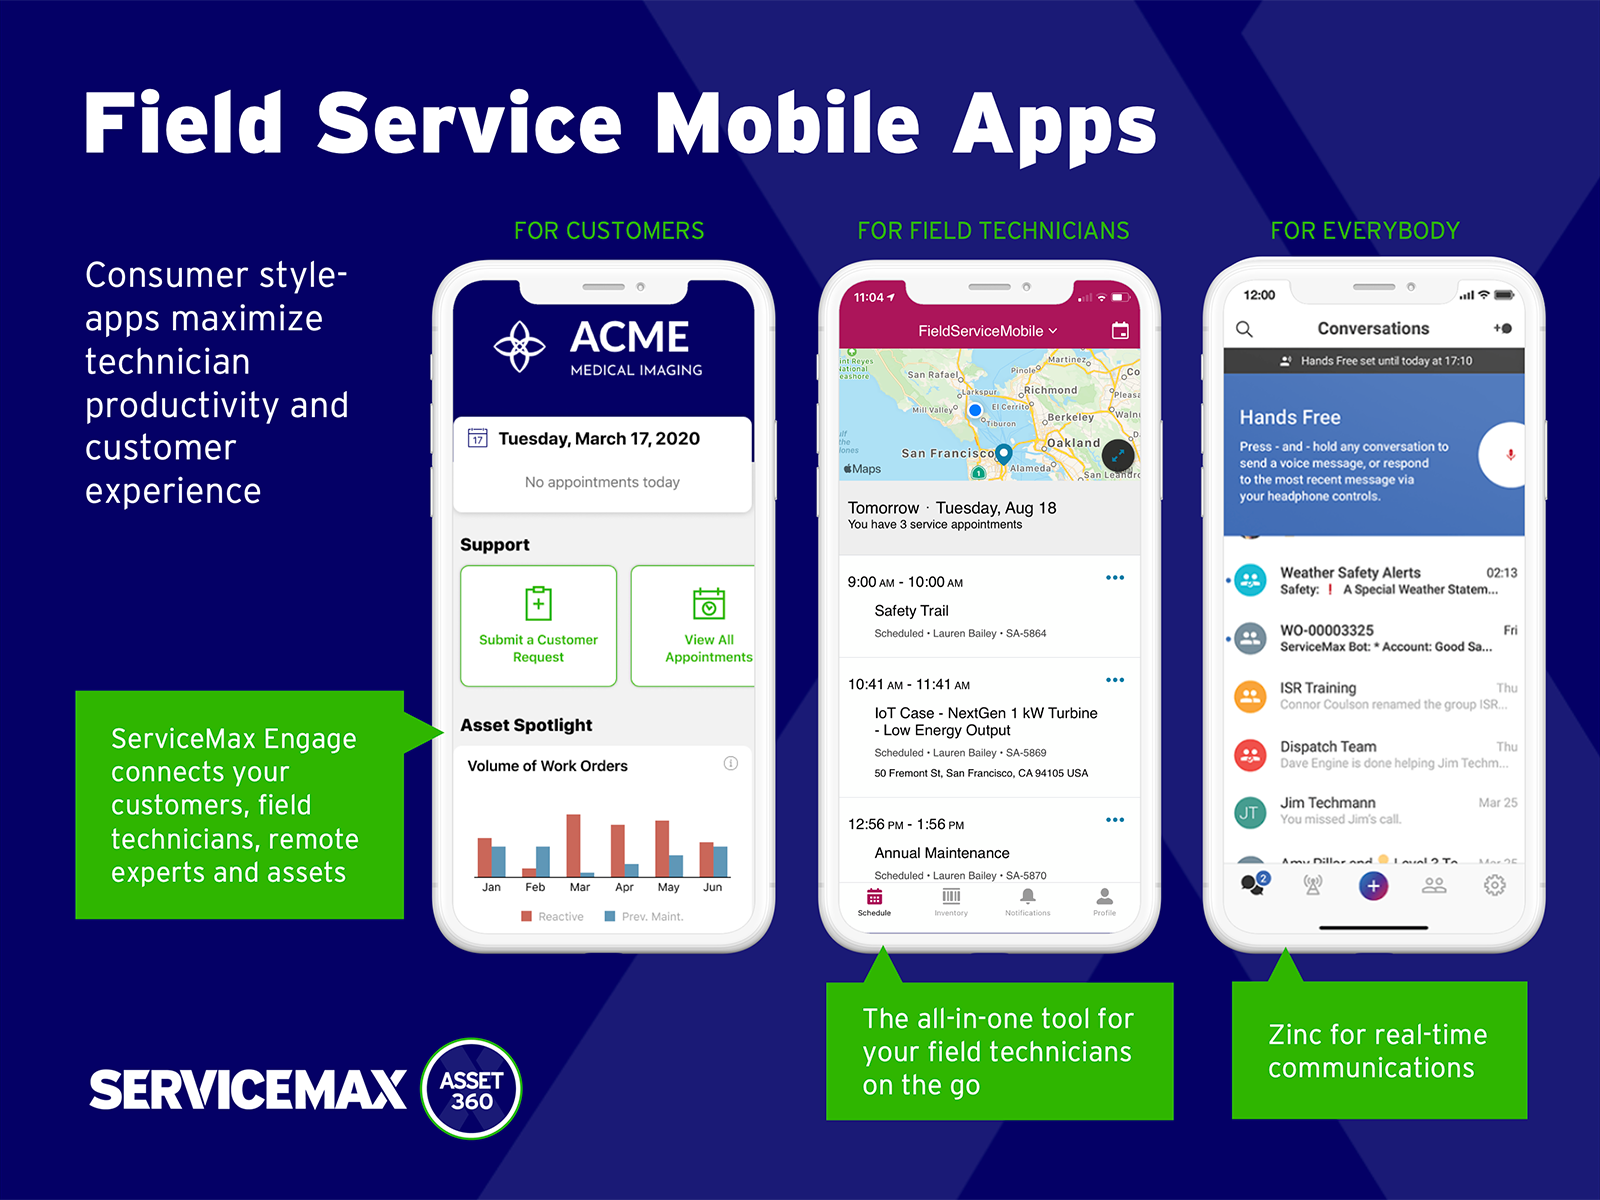 The Salesforce Mobile Field Service App for Android and iOS is an all-in-one tool for field service technicians on the go. This enterprise-class mobile experience leverages Salesforce in a lightweight design optimized for a modern mobile workforce. 